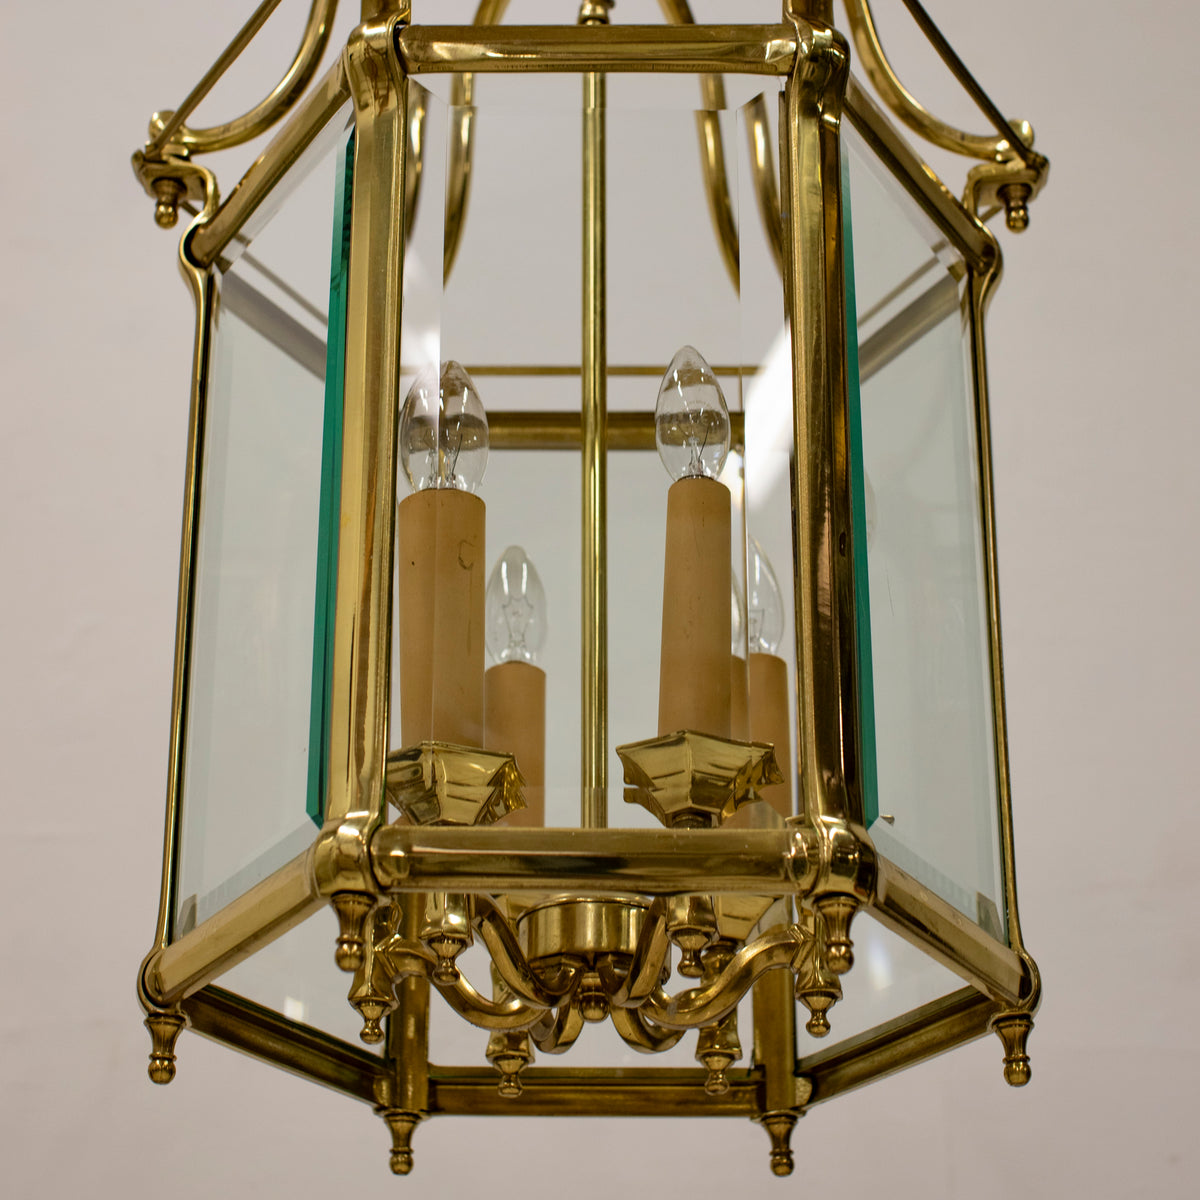 | OLD LISTING | Hexagonal Polished Brass Hanging Lantern | The Architectural Forum